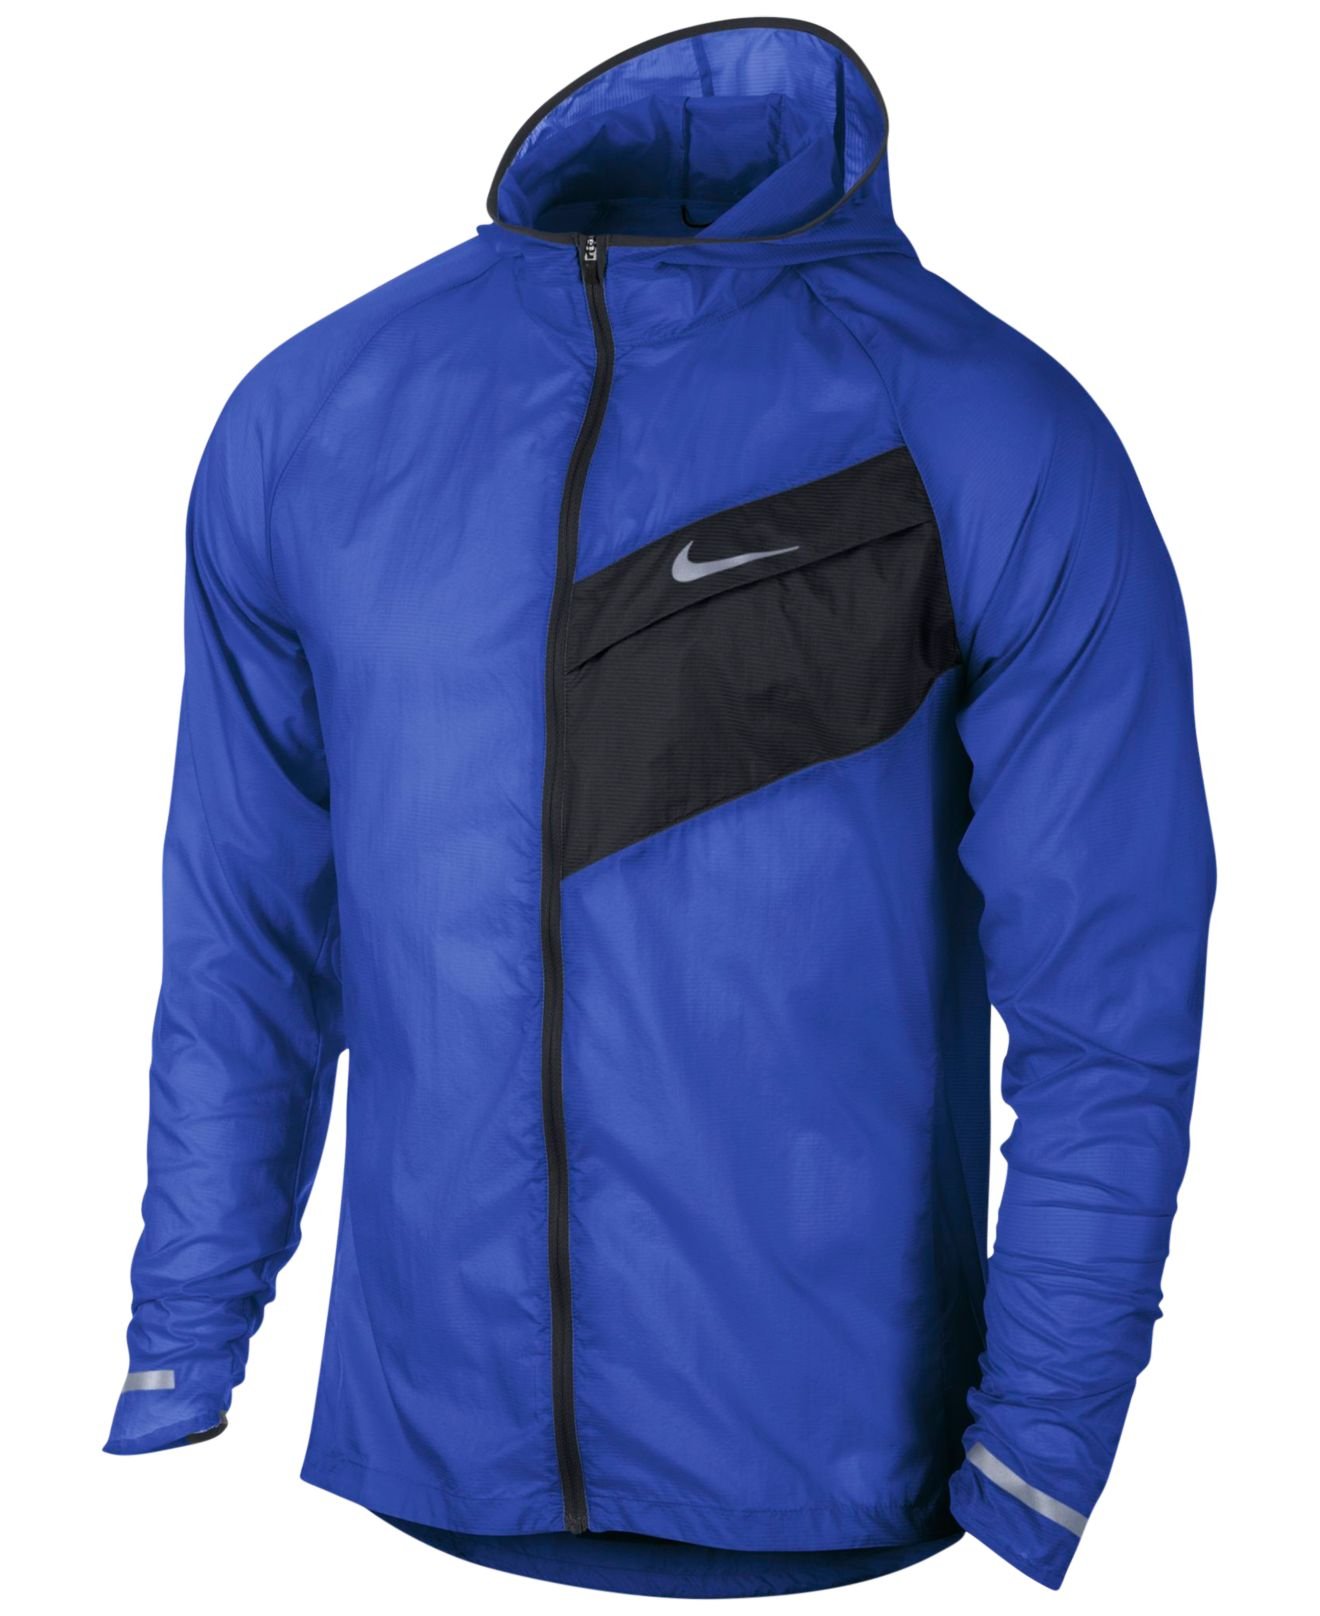 Lyst - Nike Impossibly Light Running Jacket in Blue for Men